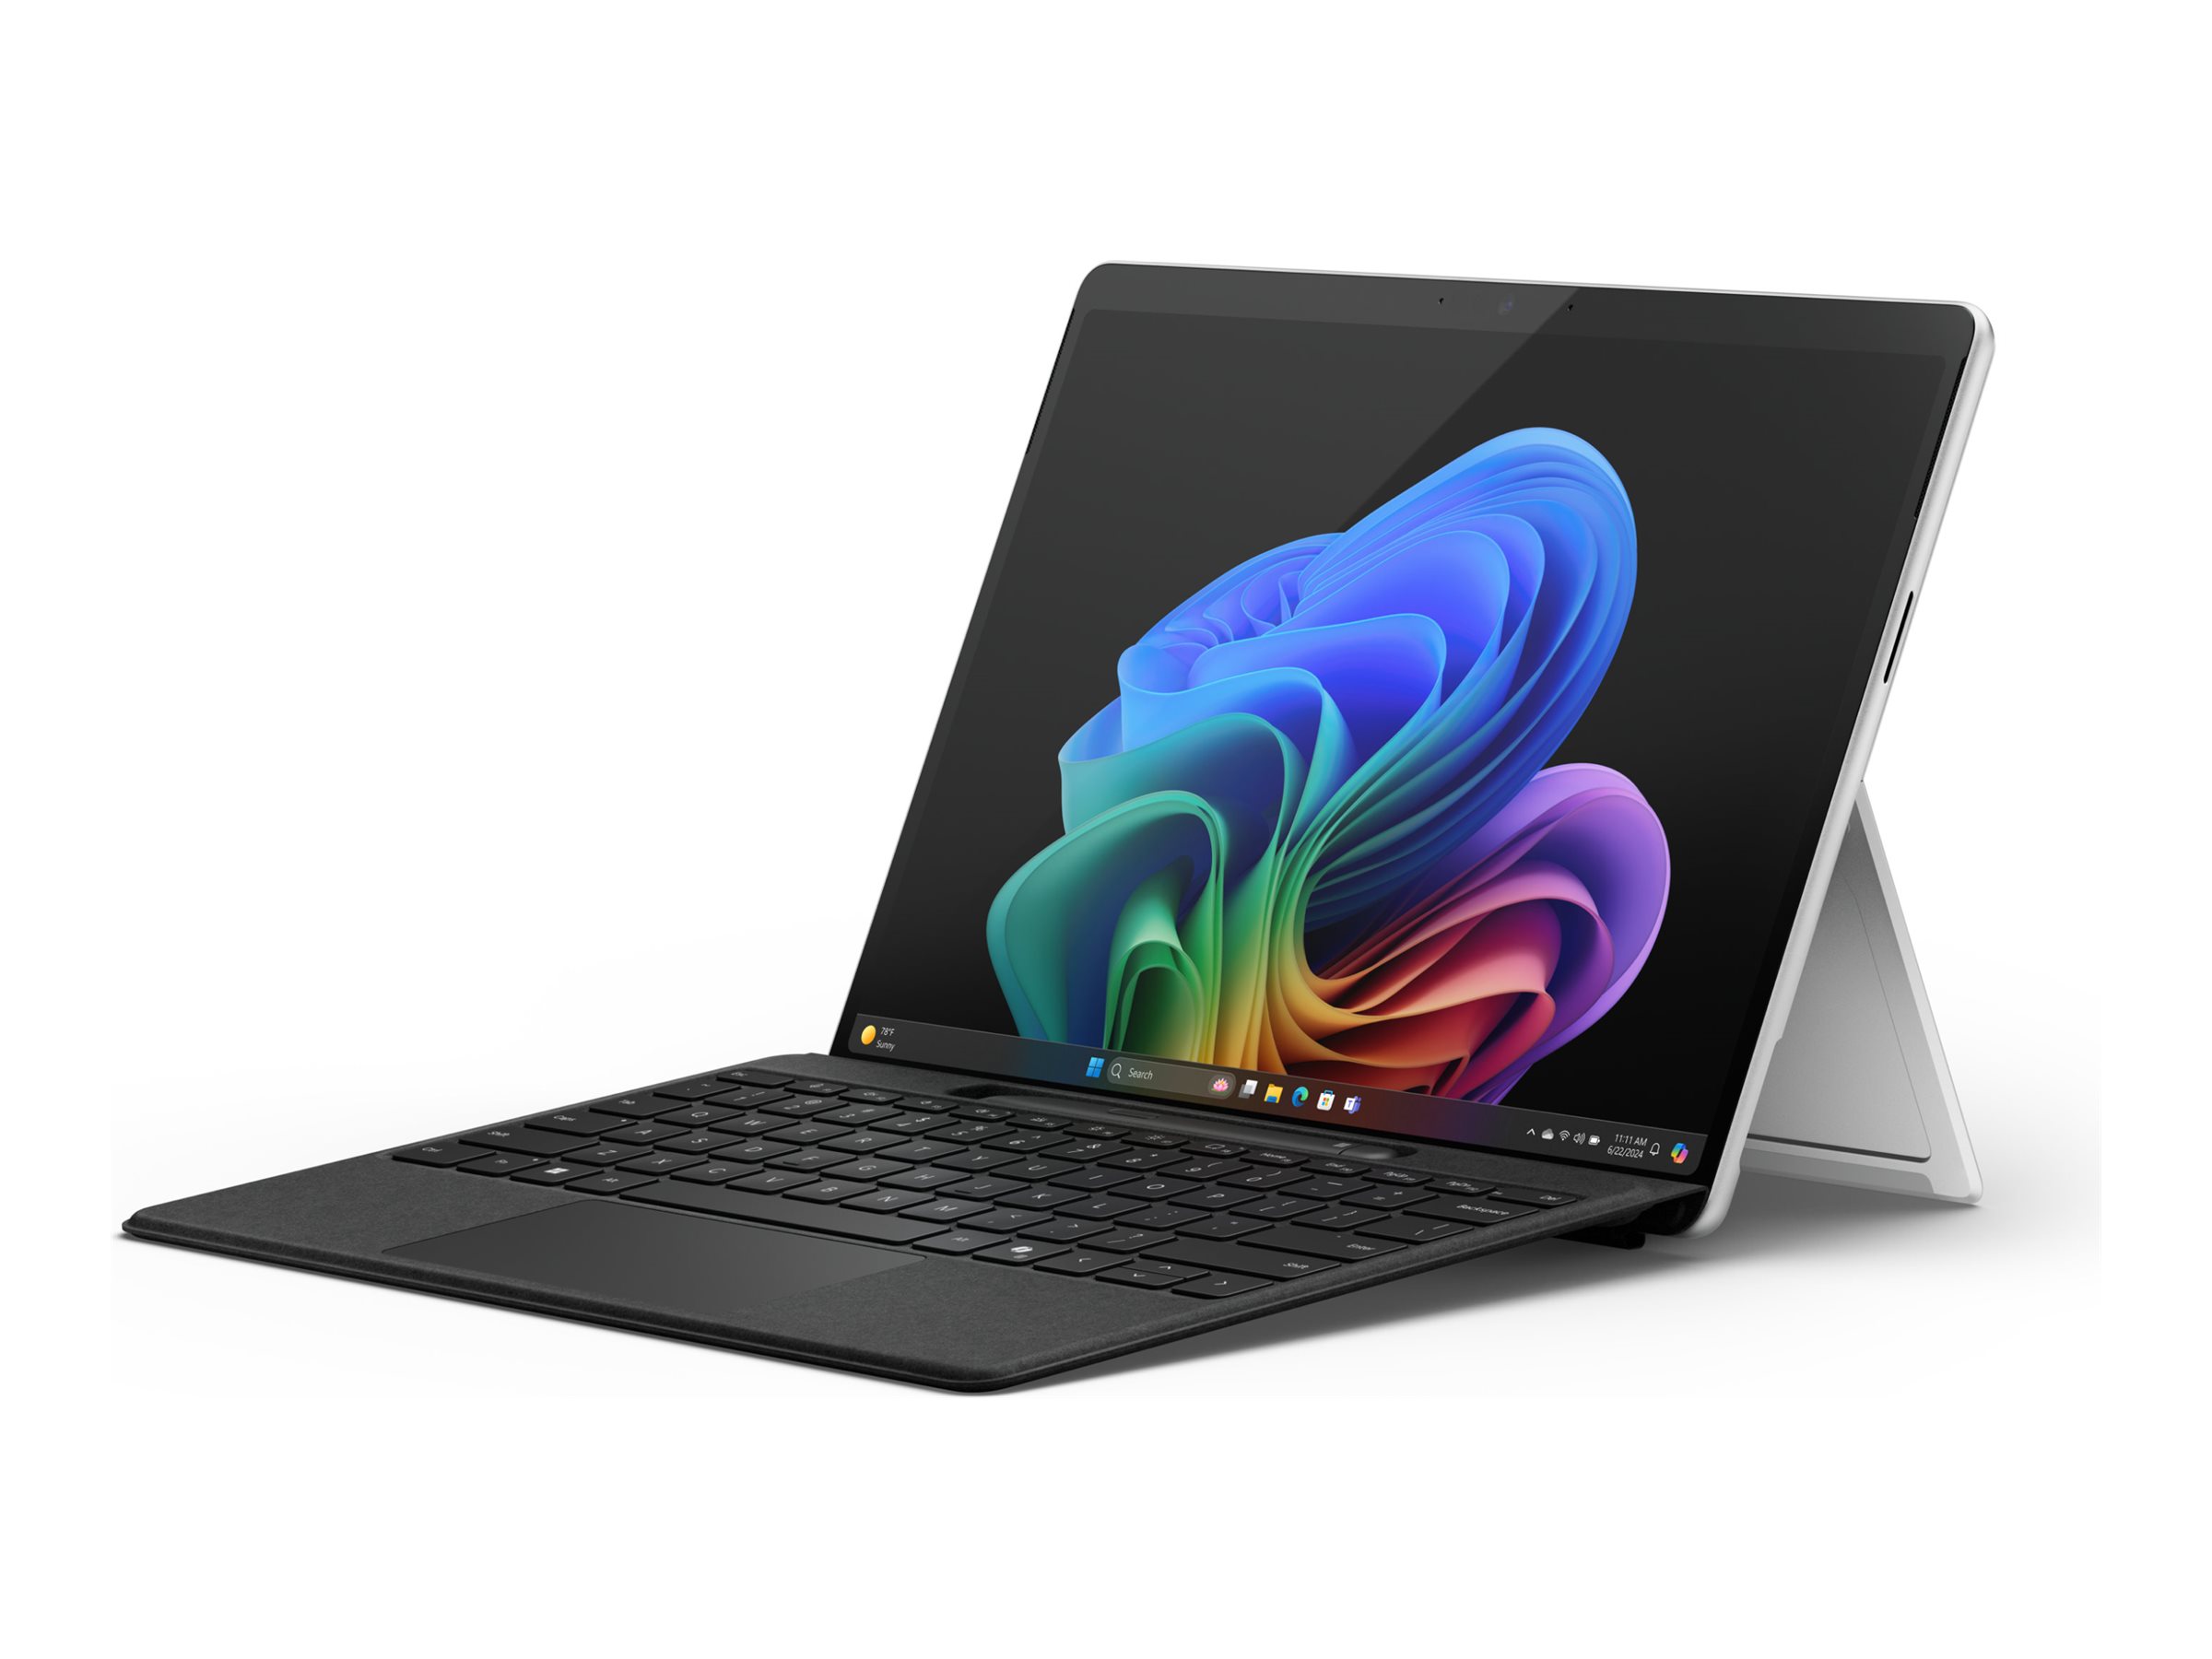 Microsoft Surface Pro Copilot+ PC for Business - 11th Edition - tablette - Snapdragon X Elite - X1E-80-100 / jusqu'à 4 GHz - Win 11 Pro - Qualcomm Adreno - 32 Go RAM - 1 To SSD - 13" OLED écran tactile 2880 x 1920 @ 120 Hz - IEEE 802.11b, IEEE 802.11a, IEEE 802.11g, IEEE 802.11n, IEEE 802.11ac, NFC, IEEE 802.11be, IEEE 802.11ax (Wi-Fi 6), Bluetooth 5.4 - NFC, Wi-Fi 7, Bluetooth - platine - ZIR-00004 - Ordinateurs portables